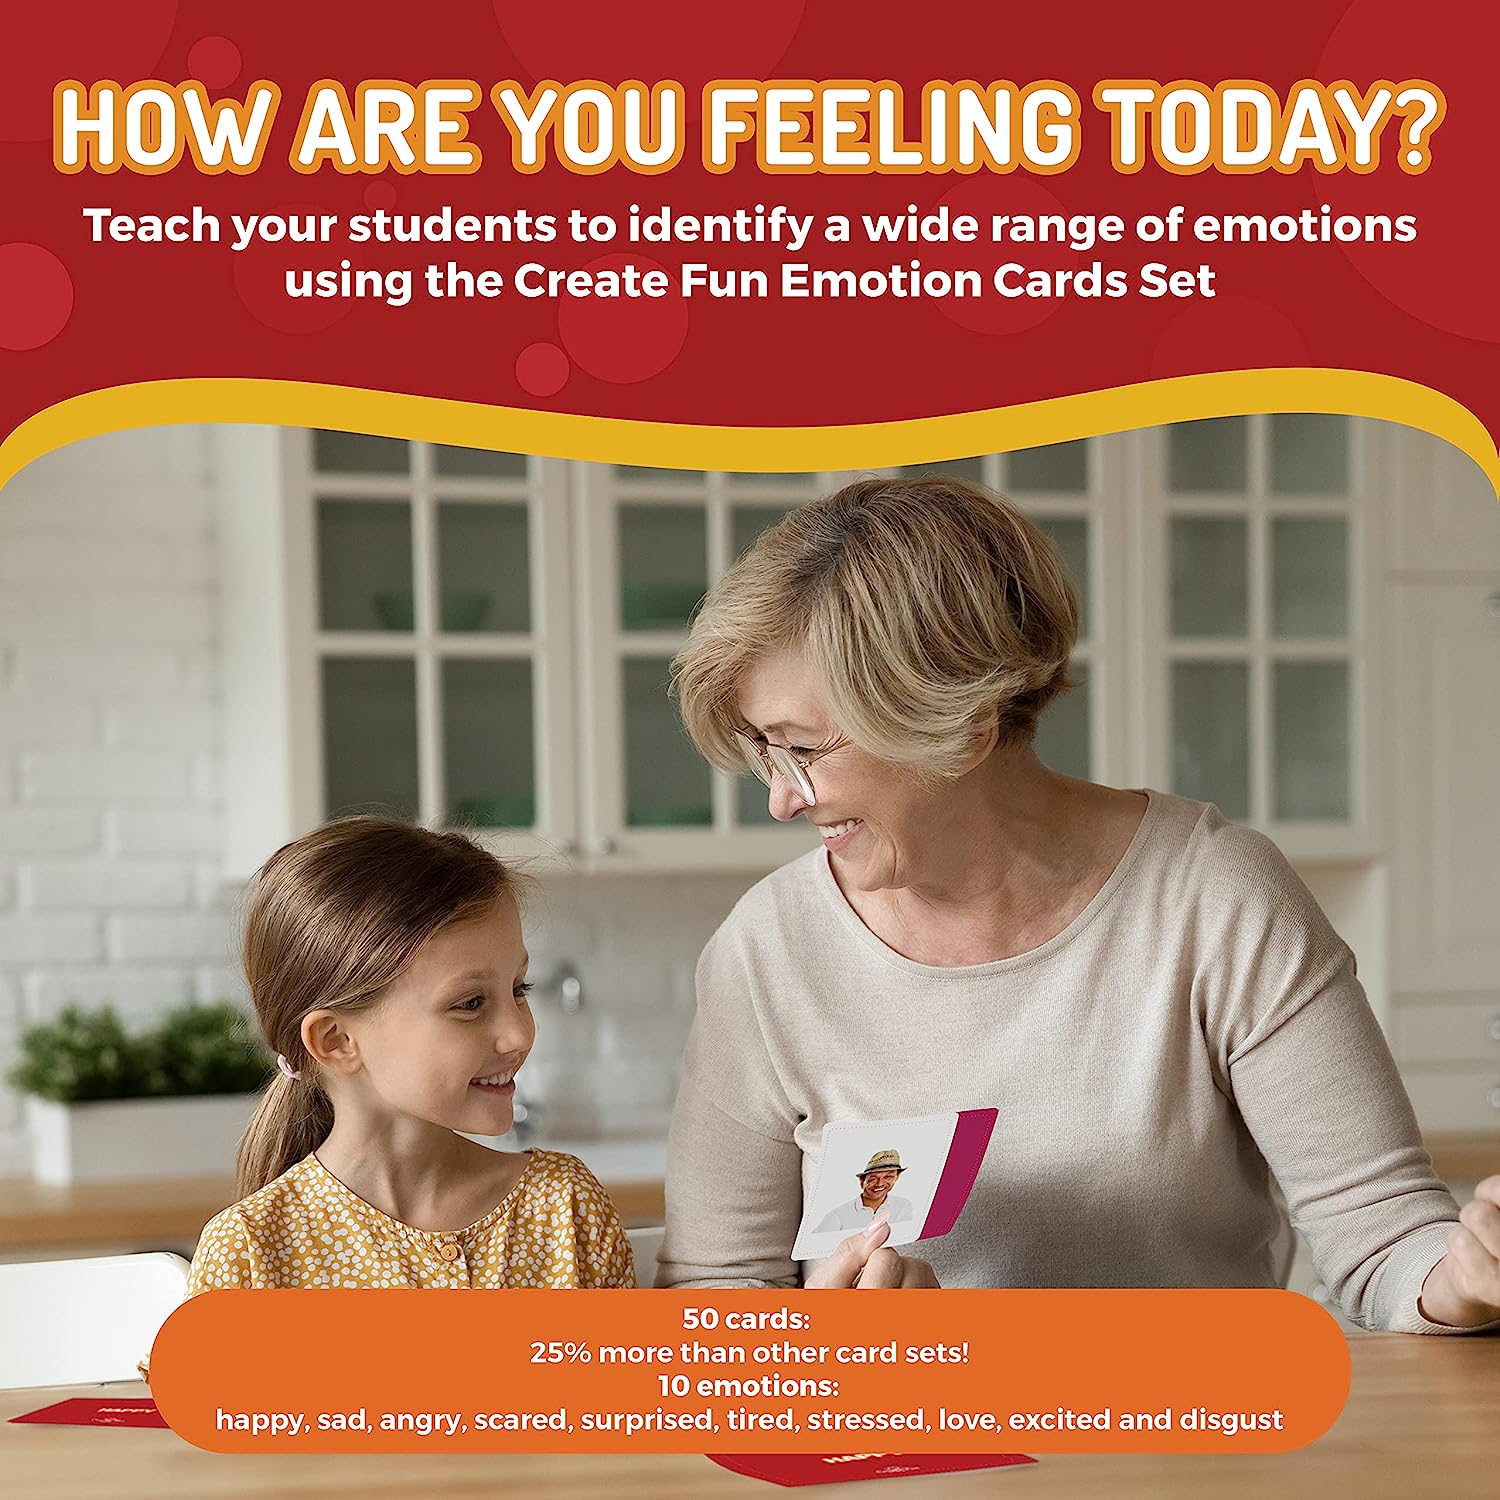 Emotions Flash Cards Volume 2-50 Feeling Flash Cards for Kids - Durable Feeling Flash Cards for Speech Therapy, Occupational Therapy, ESL, Autism Programs, and More